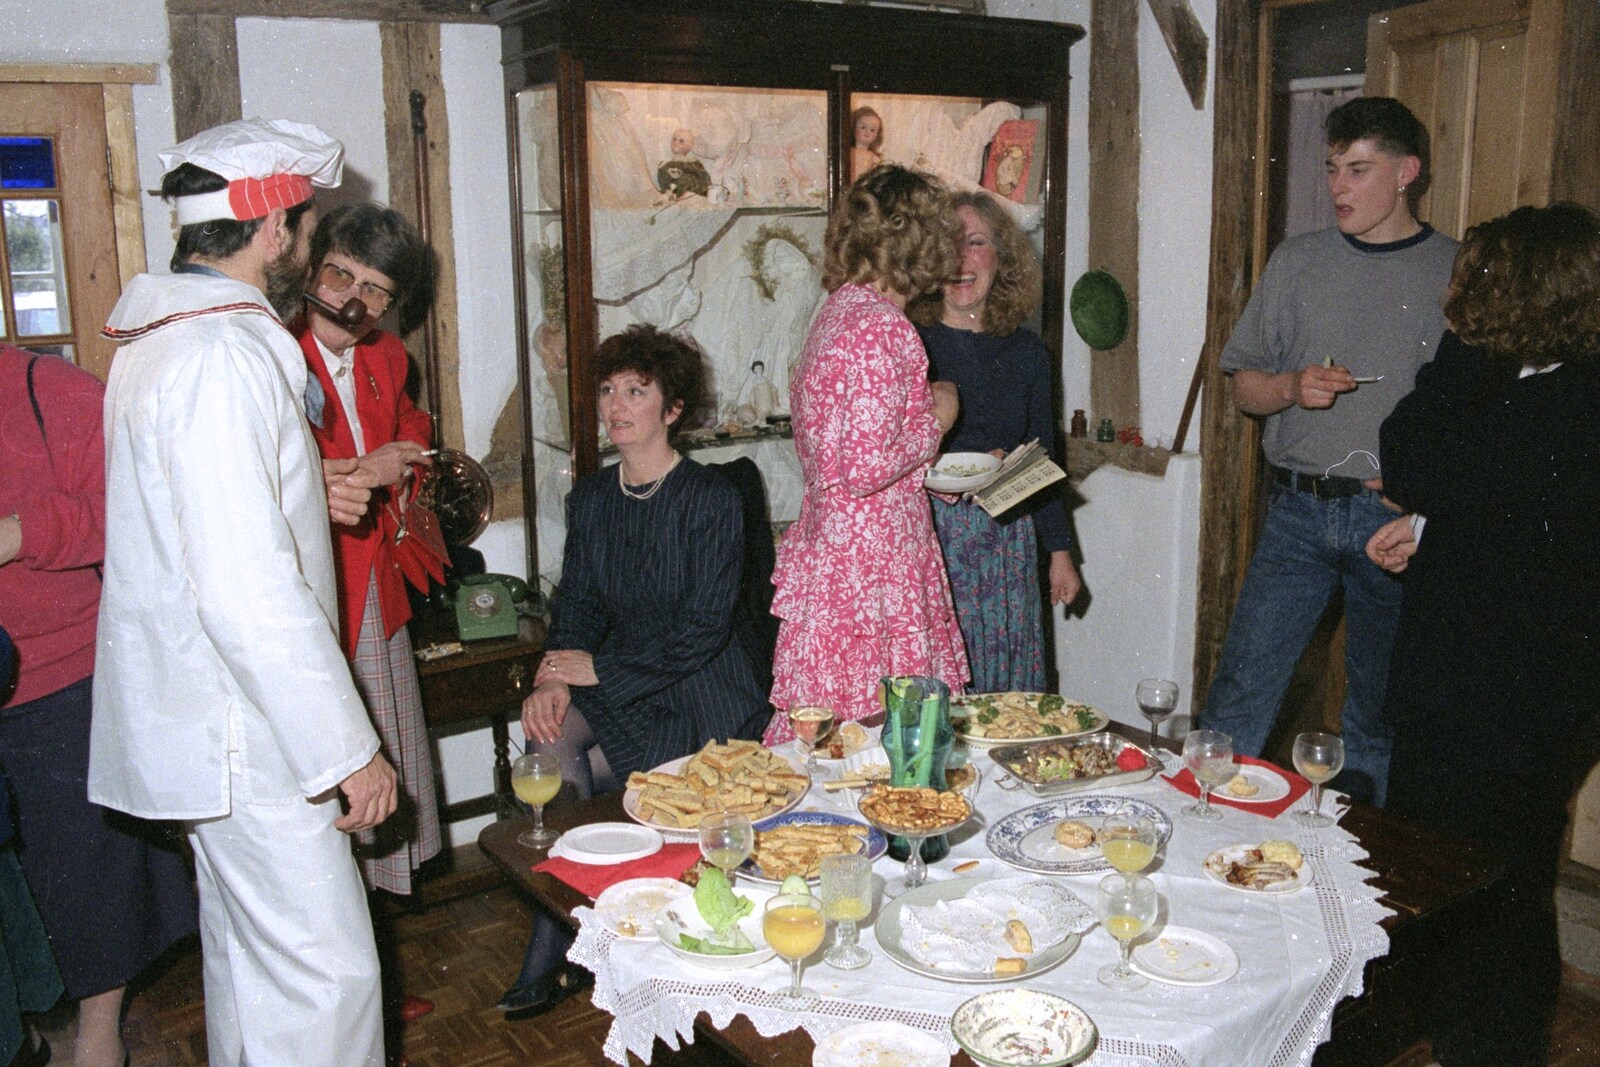 Snacks on the table from Pancake Day in Starston, Norfolk - 27th February 1990